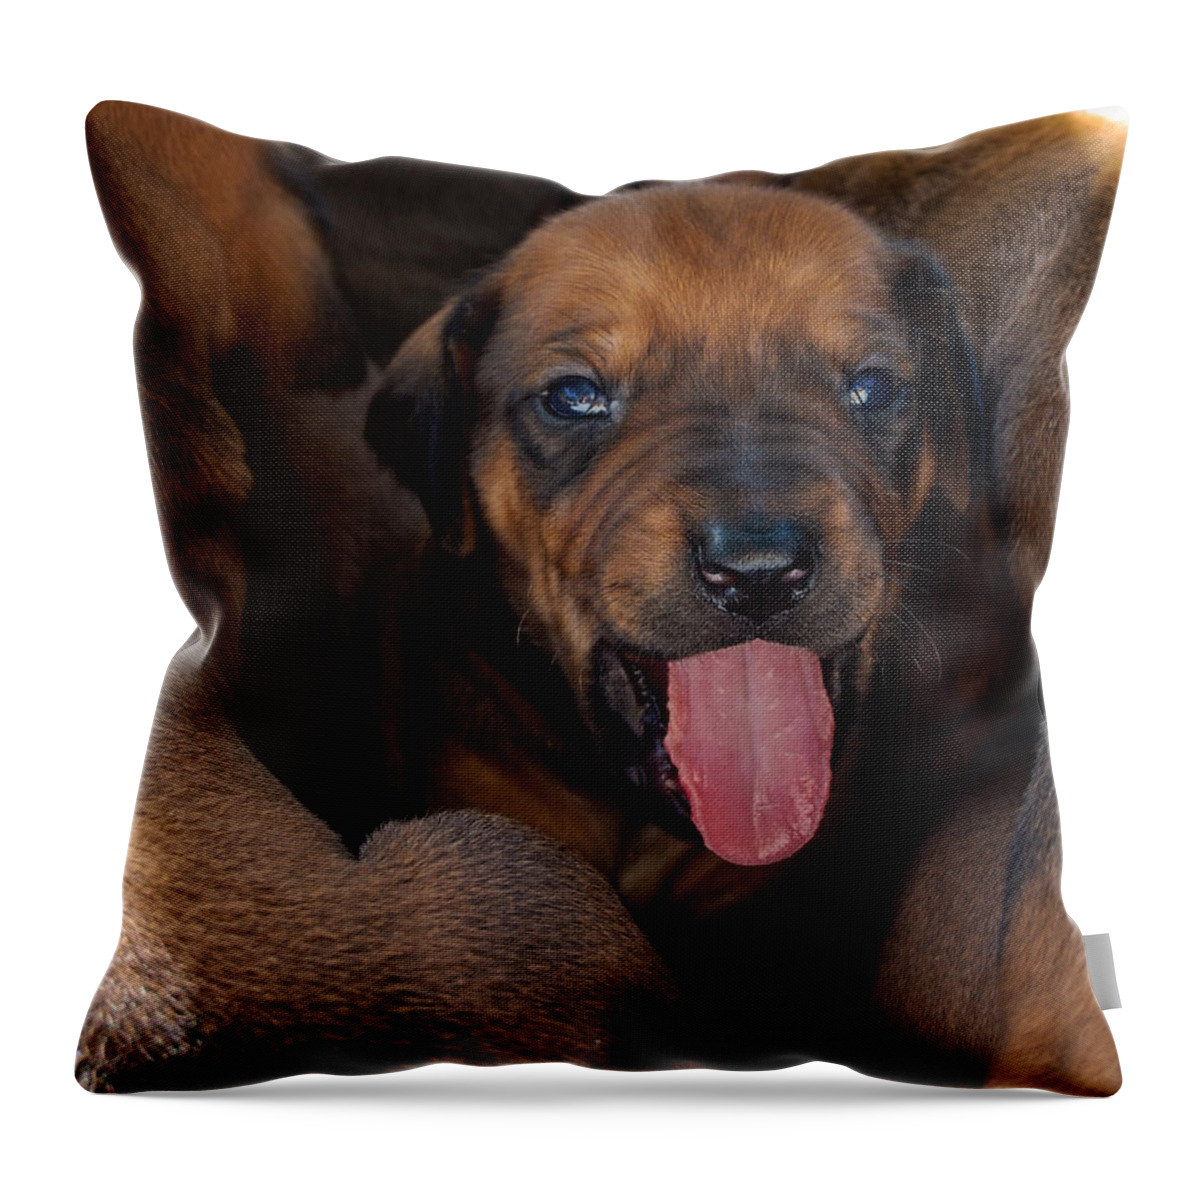 Fine Art America Puppy Throw Pillow featuring the photograph Puppy by Mim White